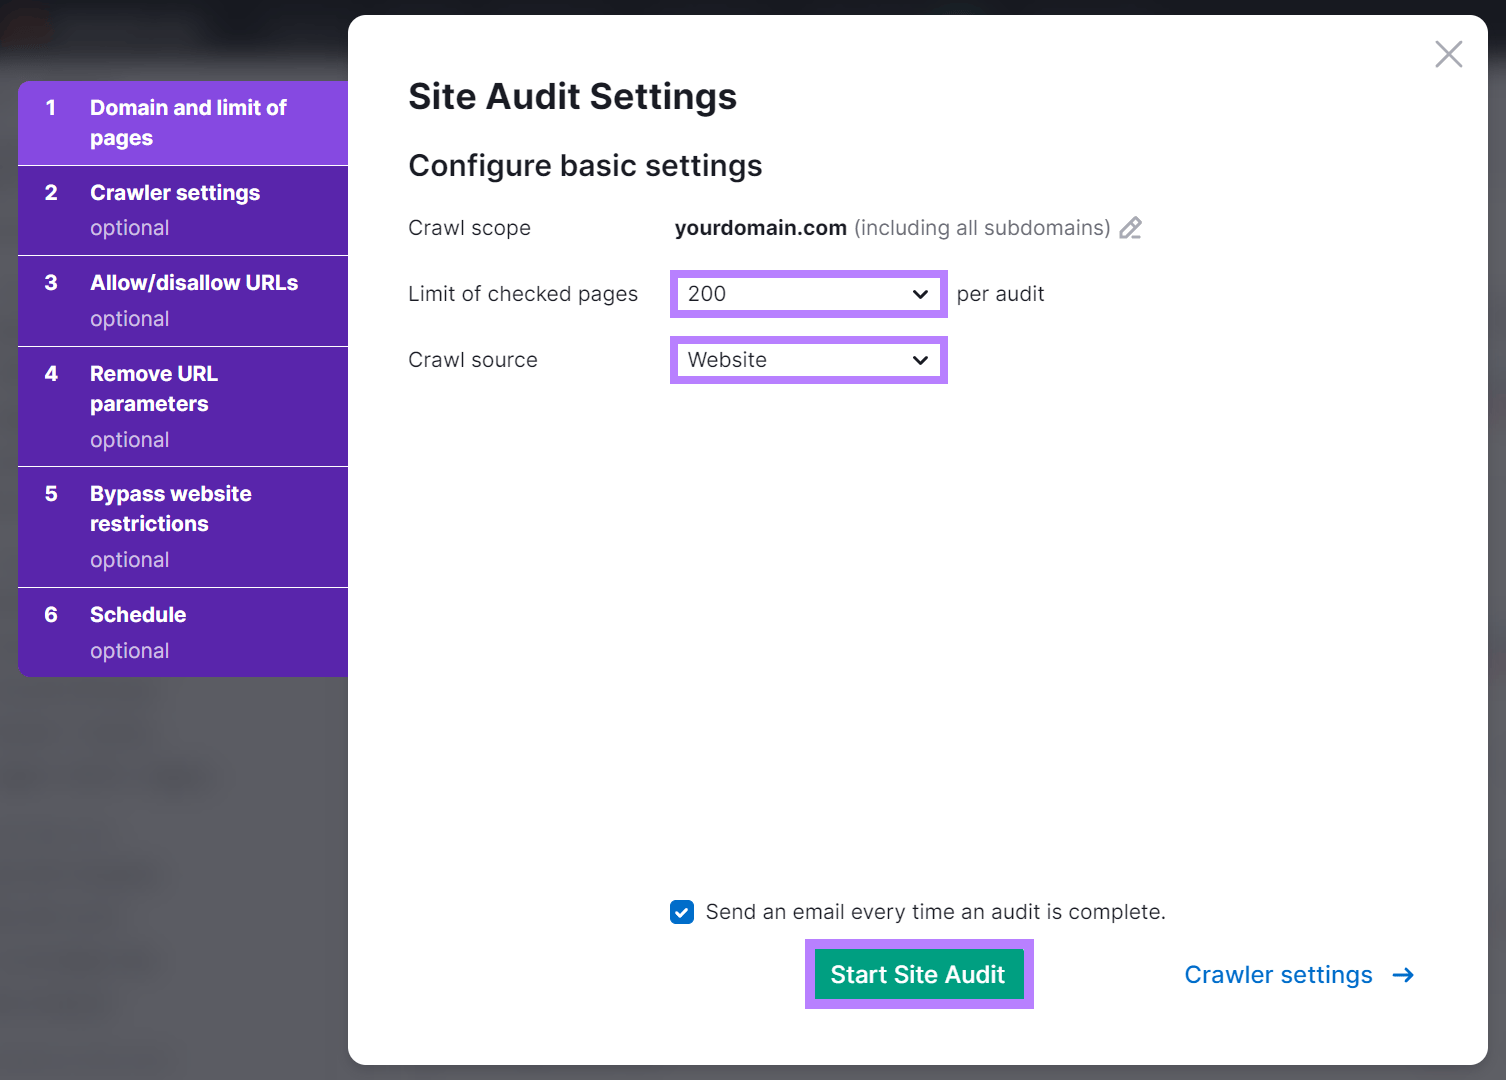 Site Audit settings options and 'Start Site Audit' button highlighted.